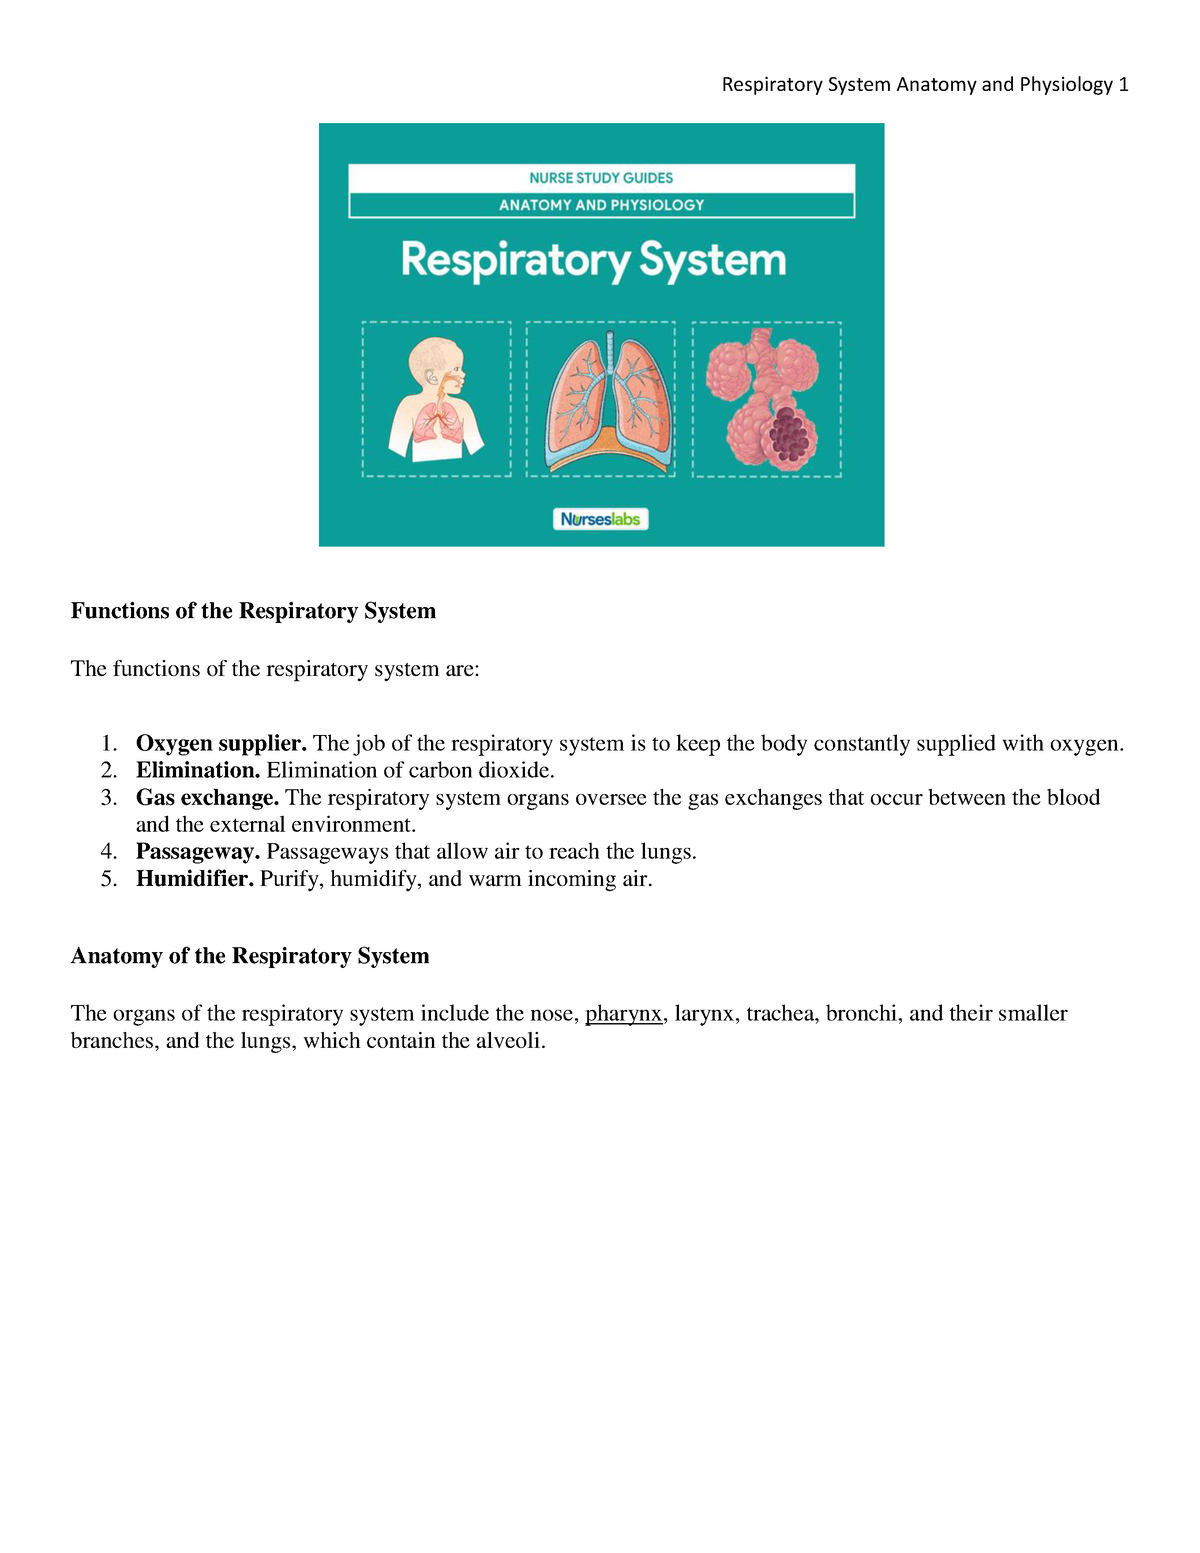 nurseslabs-respiratory-system-anatomy-and-physiology-docx-functions